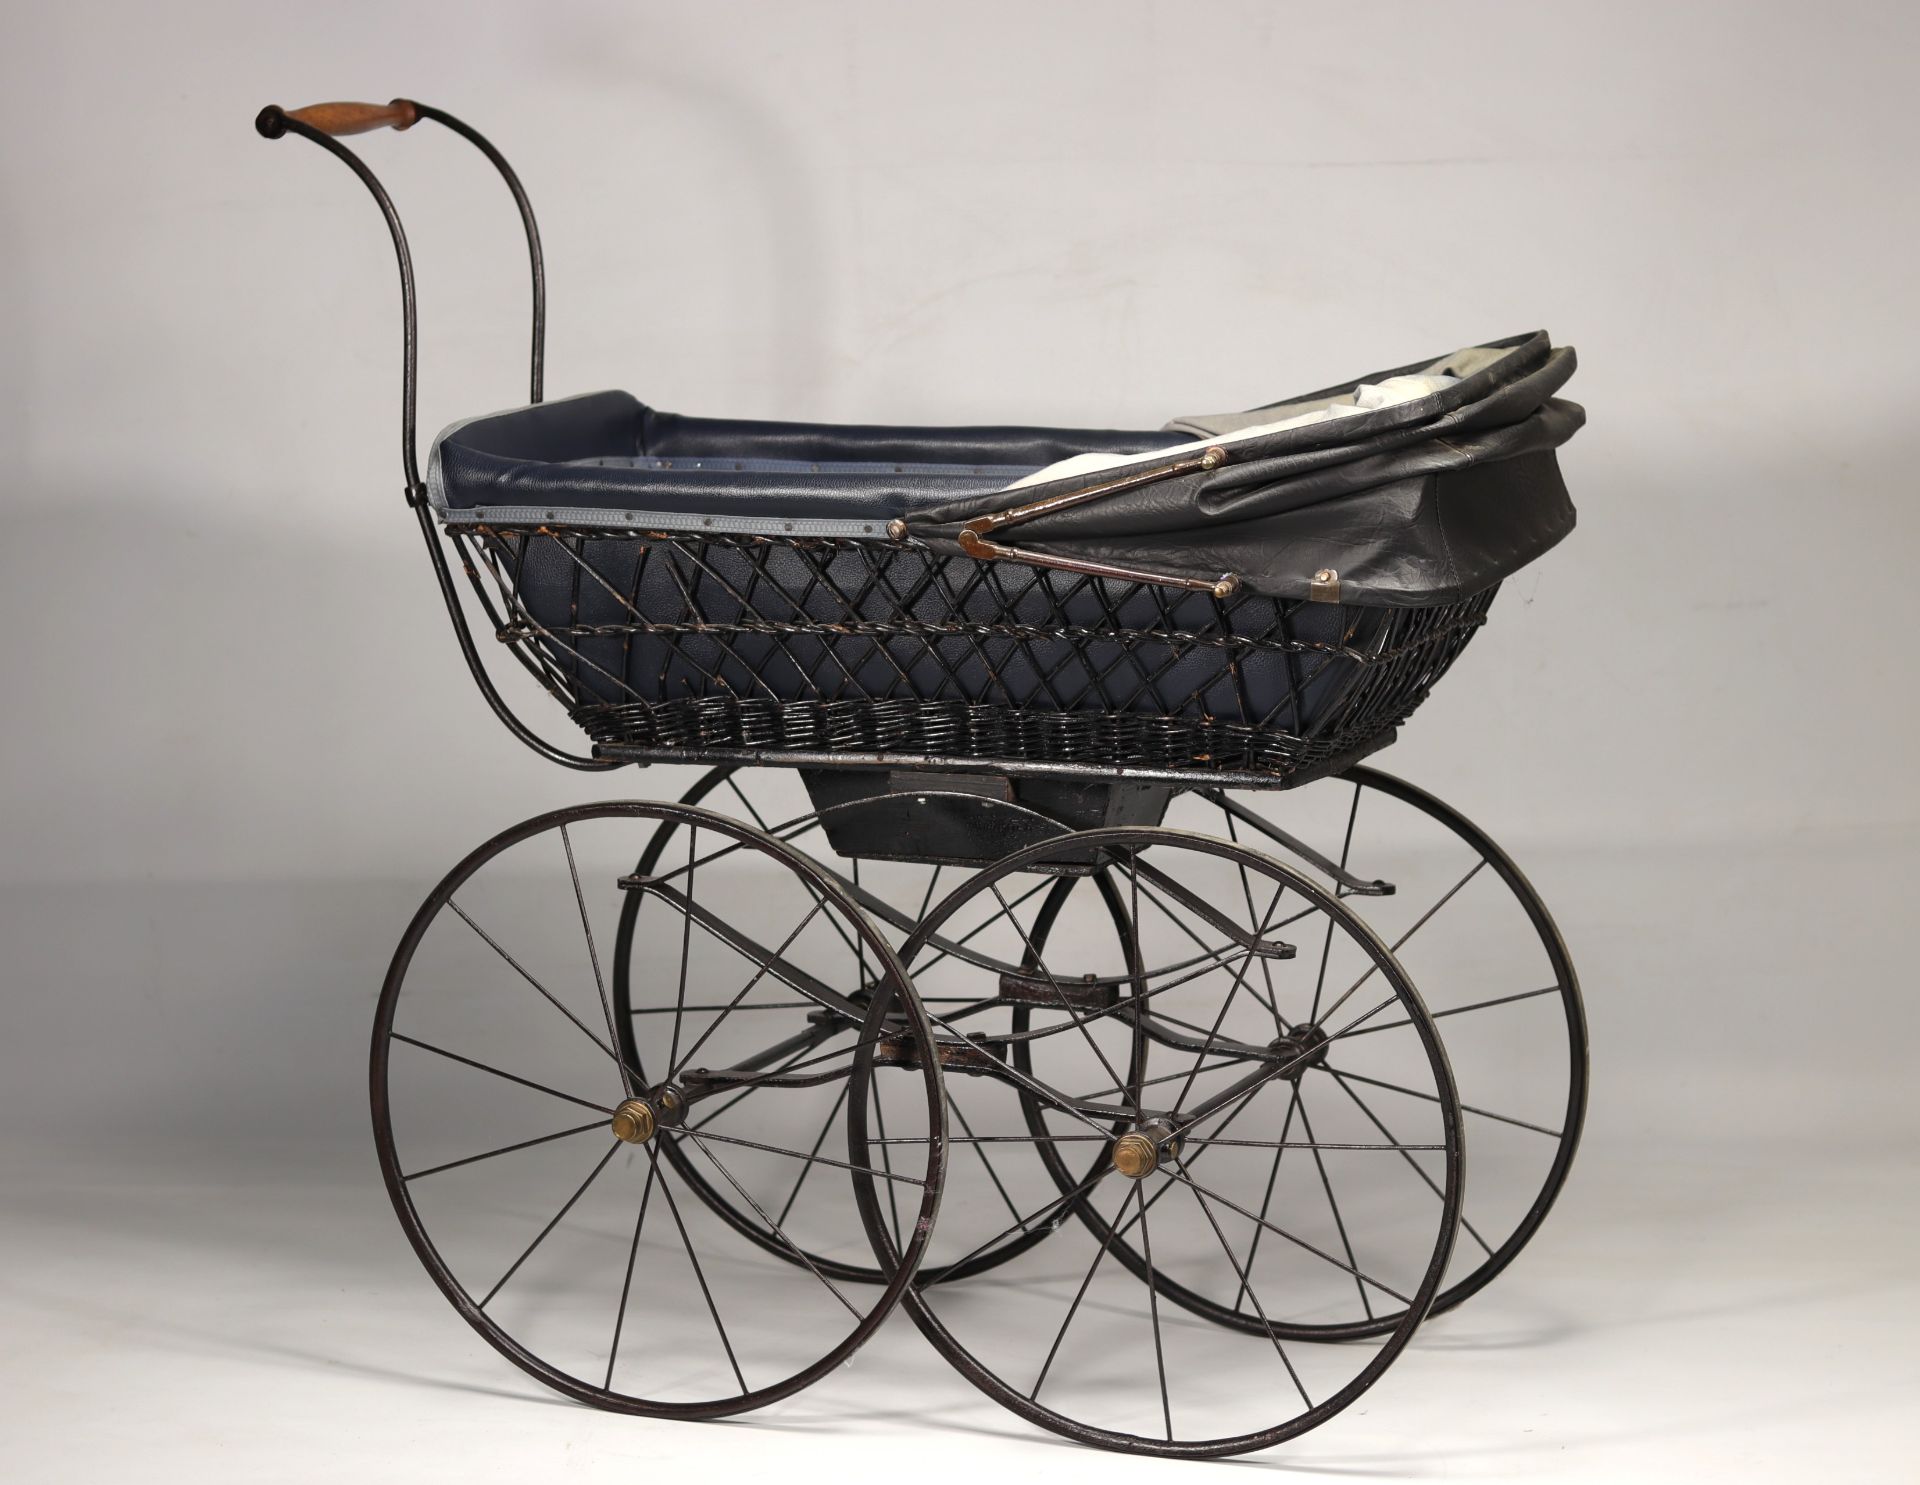 Doll's wicker and wrought iron pram, early 20th century.